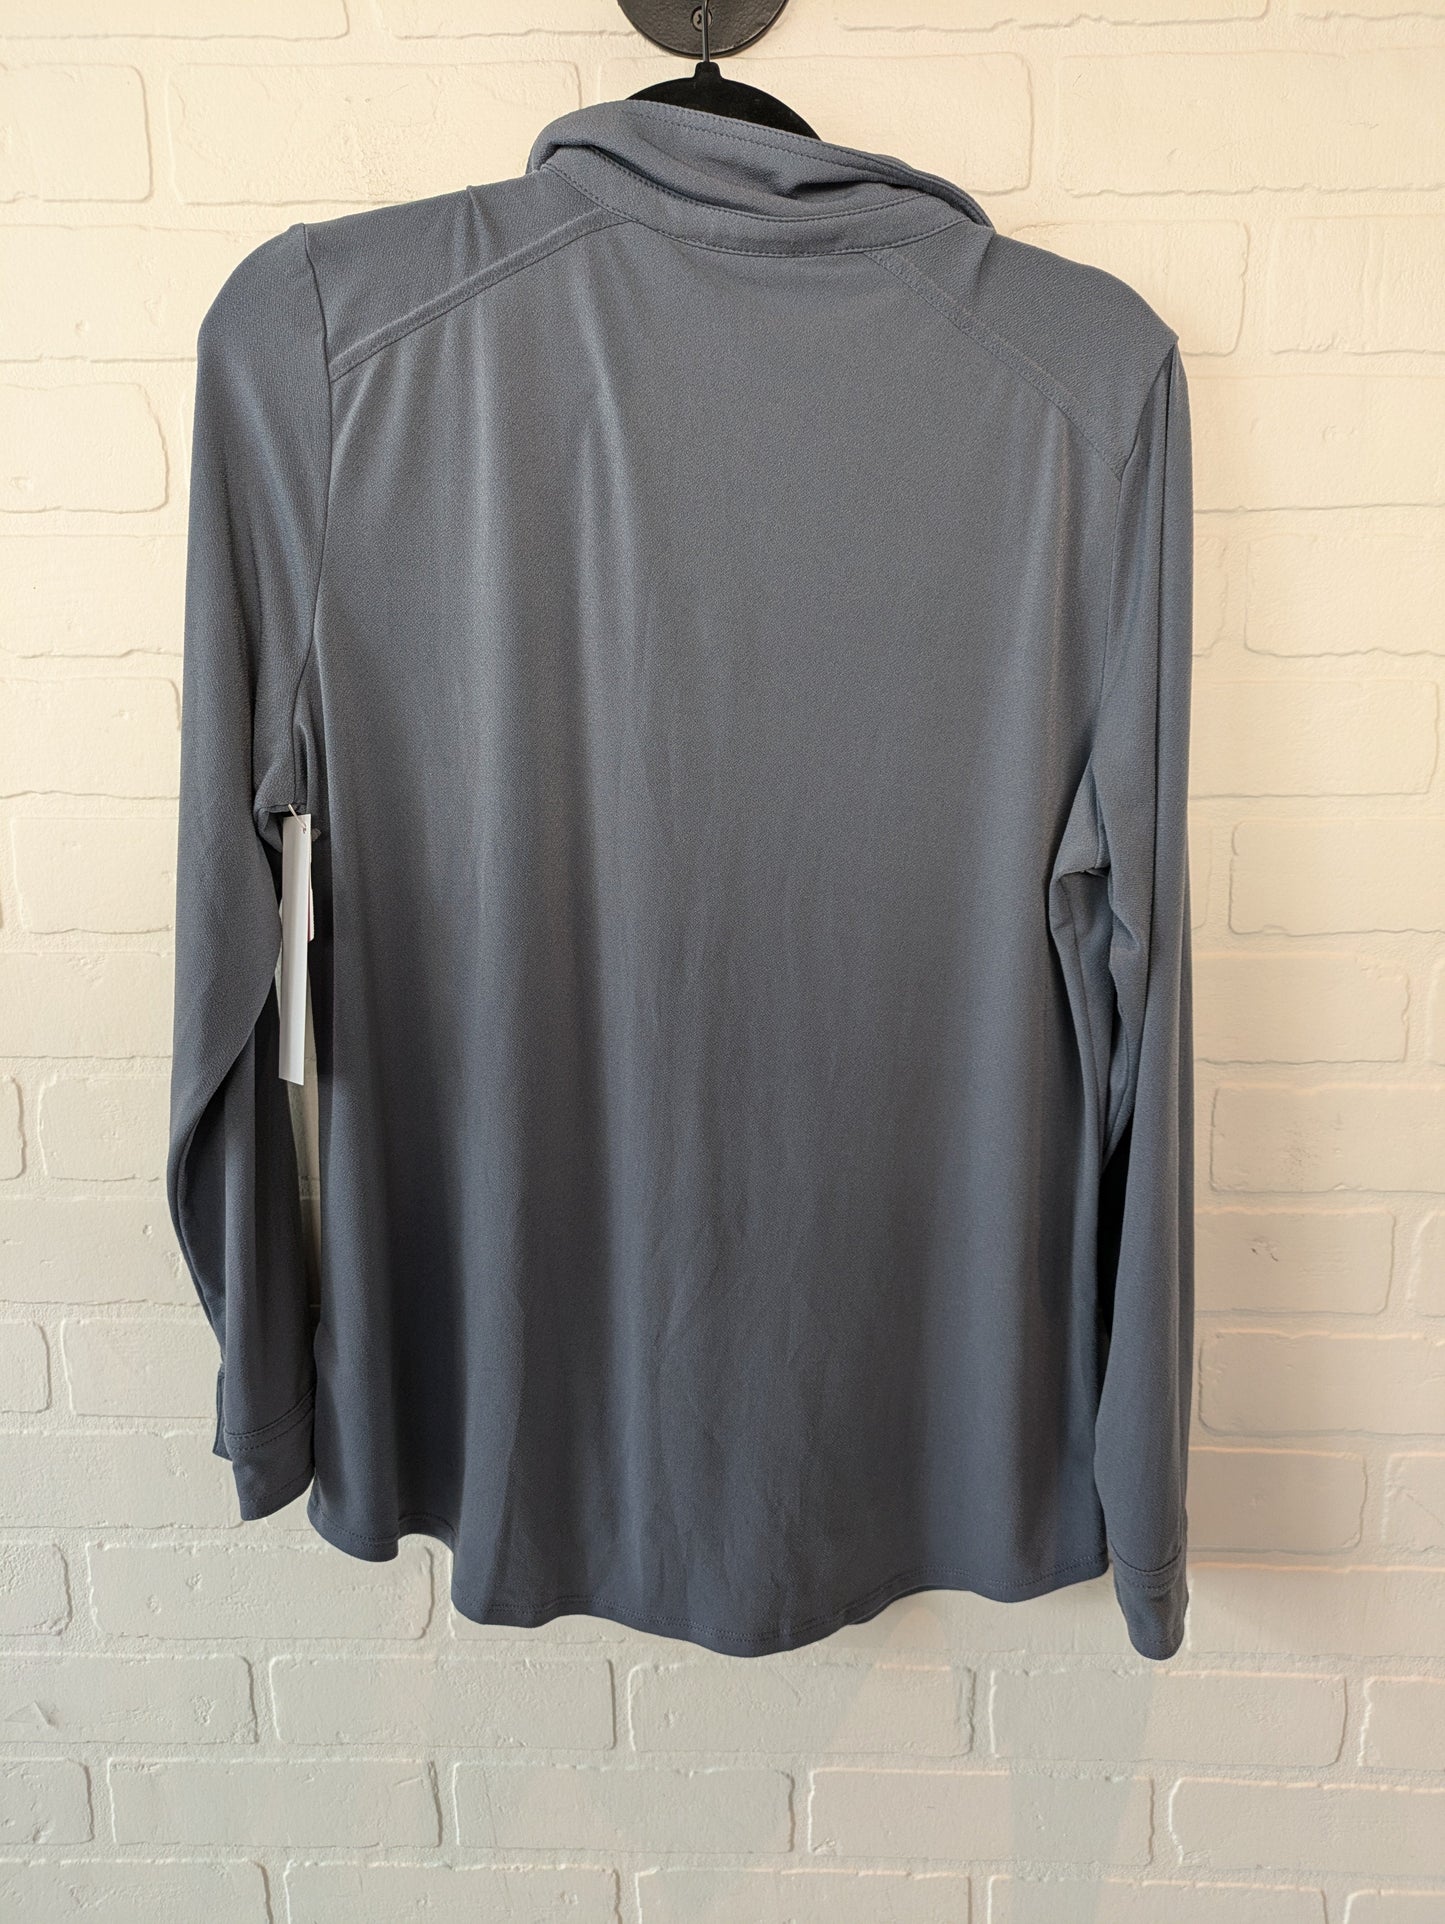 Grey Top Long Sleeve Adrianna Papell, Size L